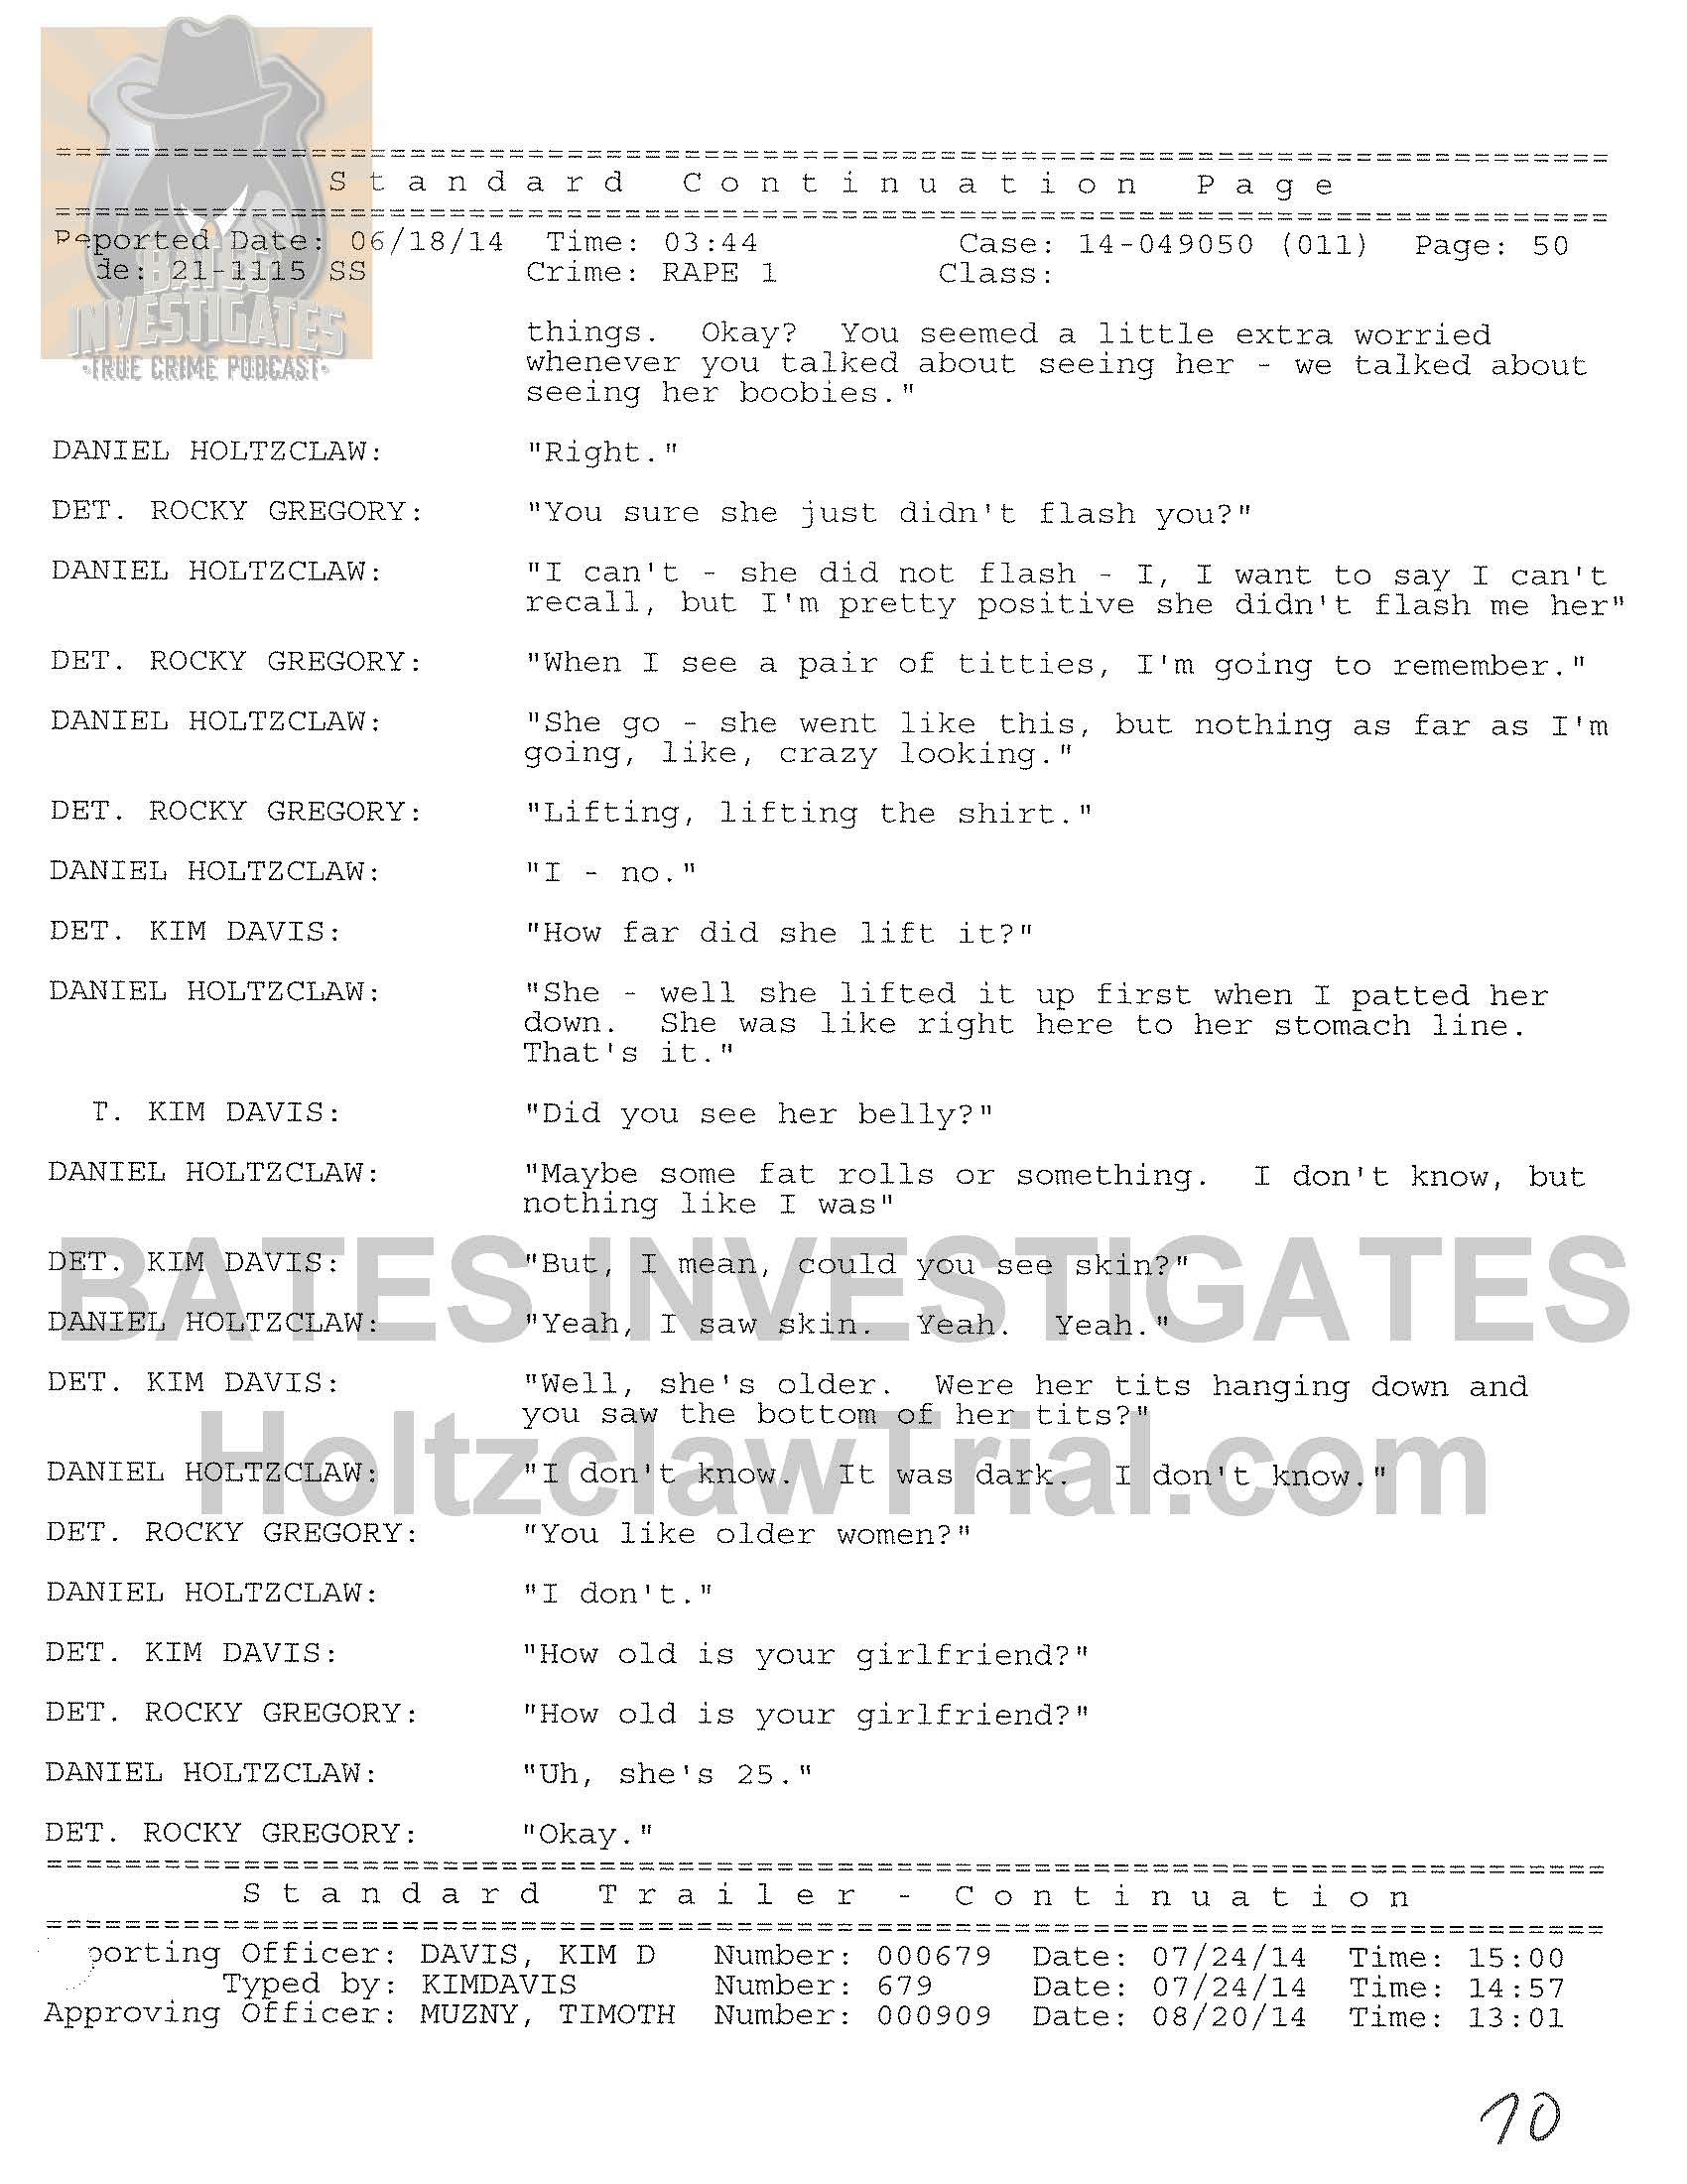 Holtzclaw Interrogation Transcript - Ep02 Redacted_Page_50.jpg